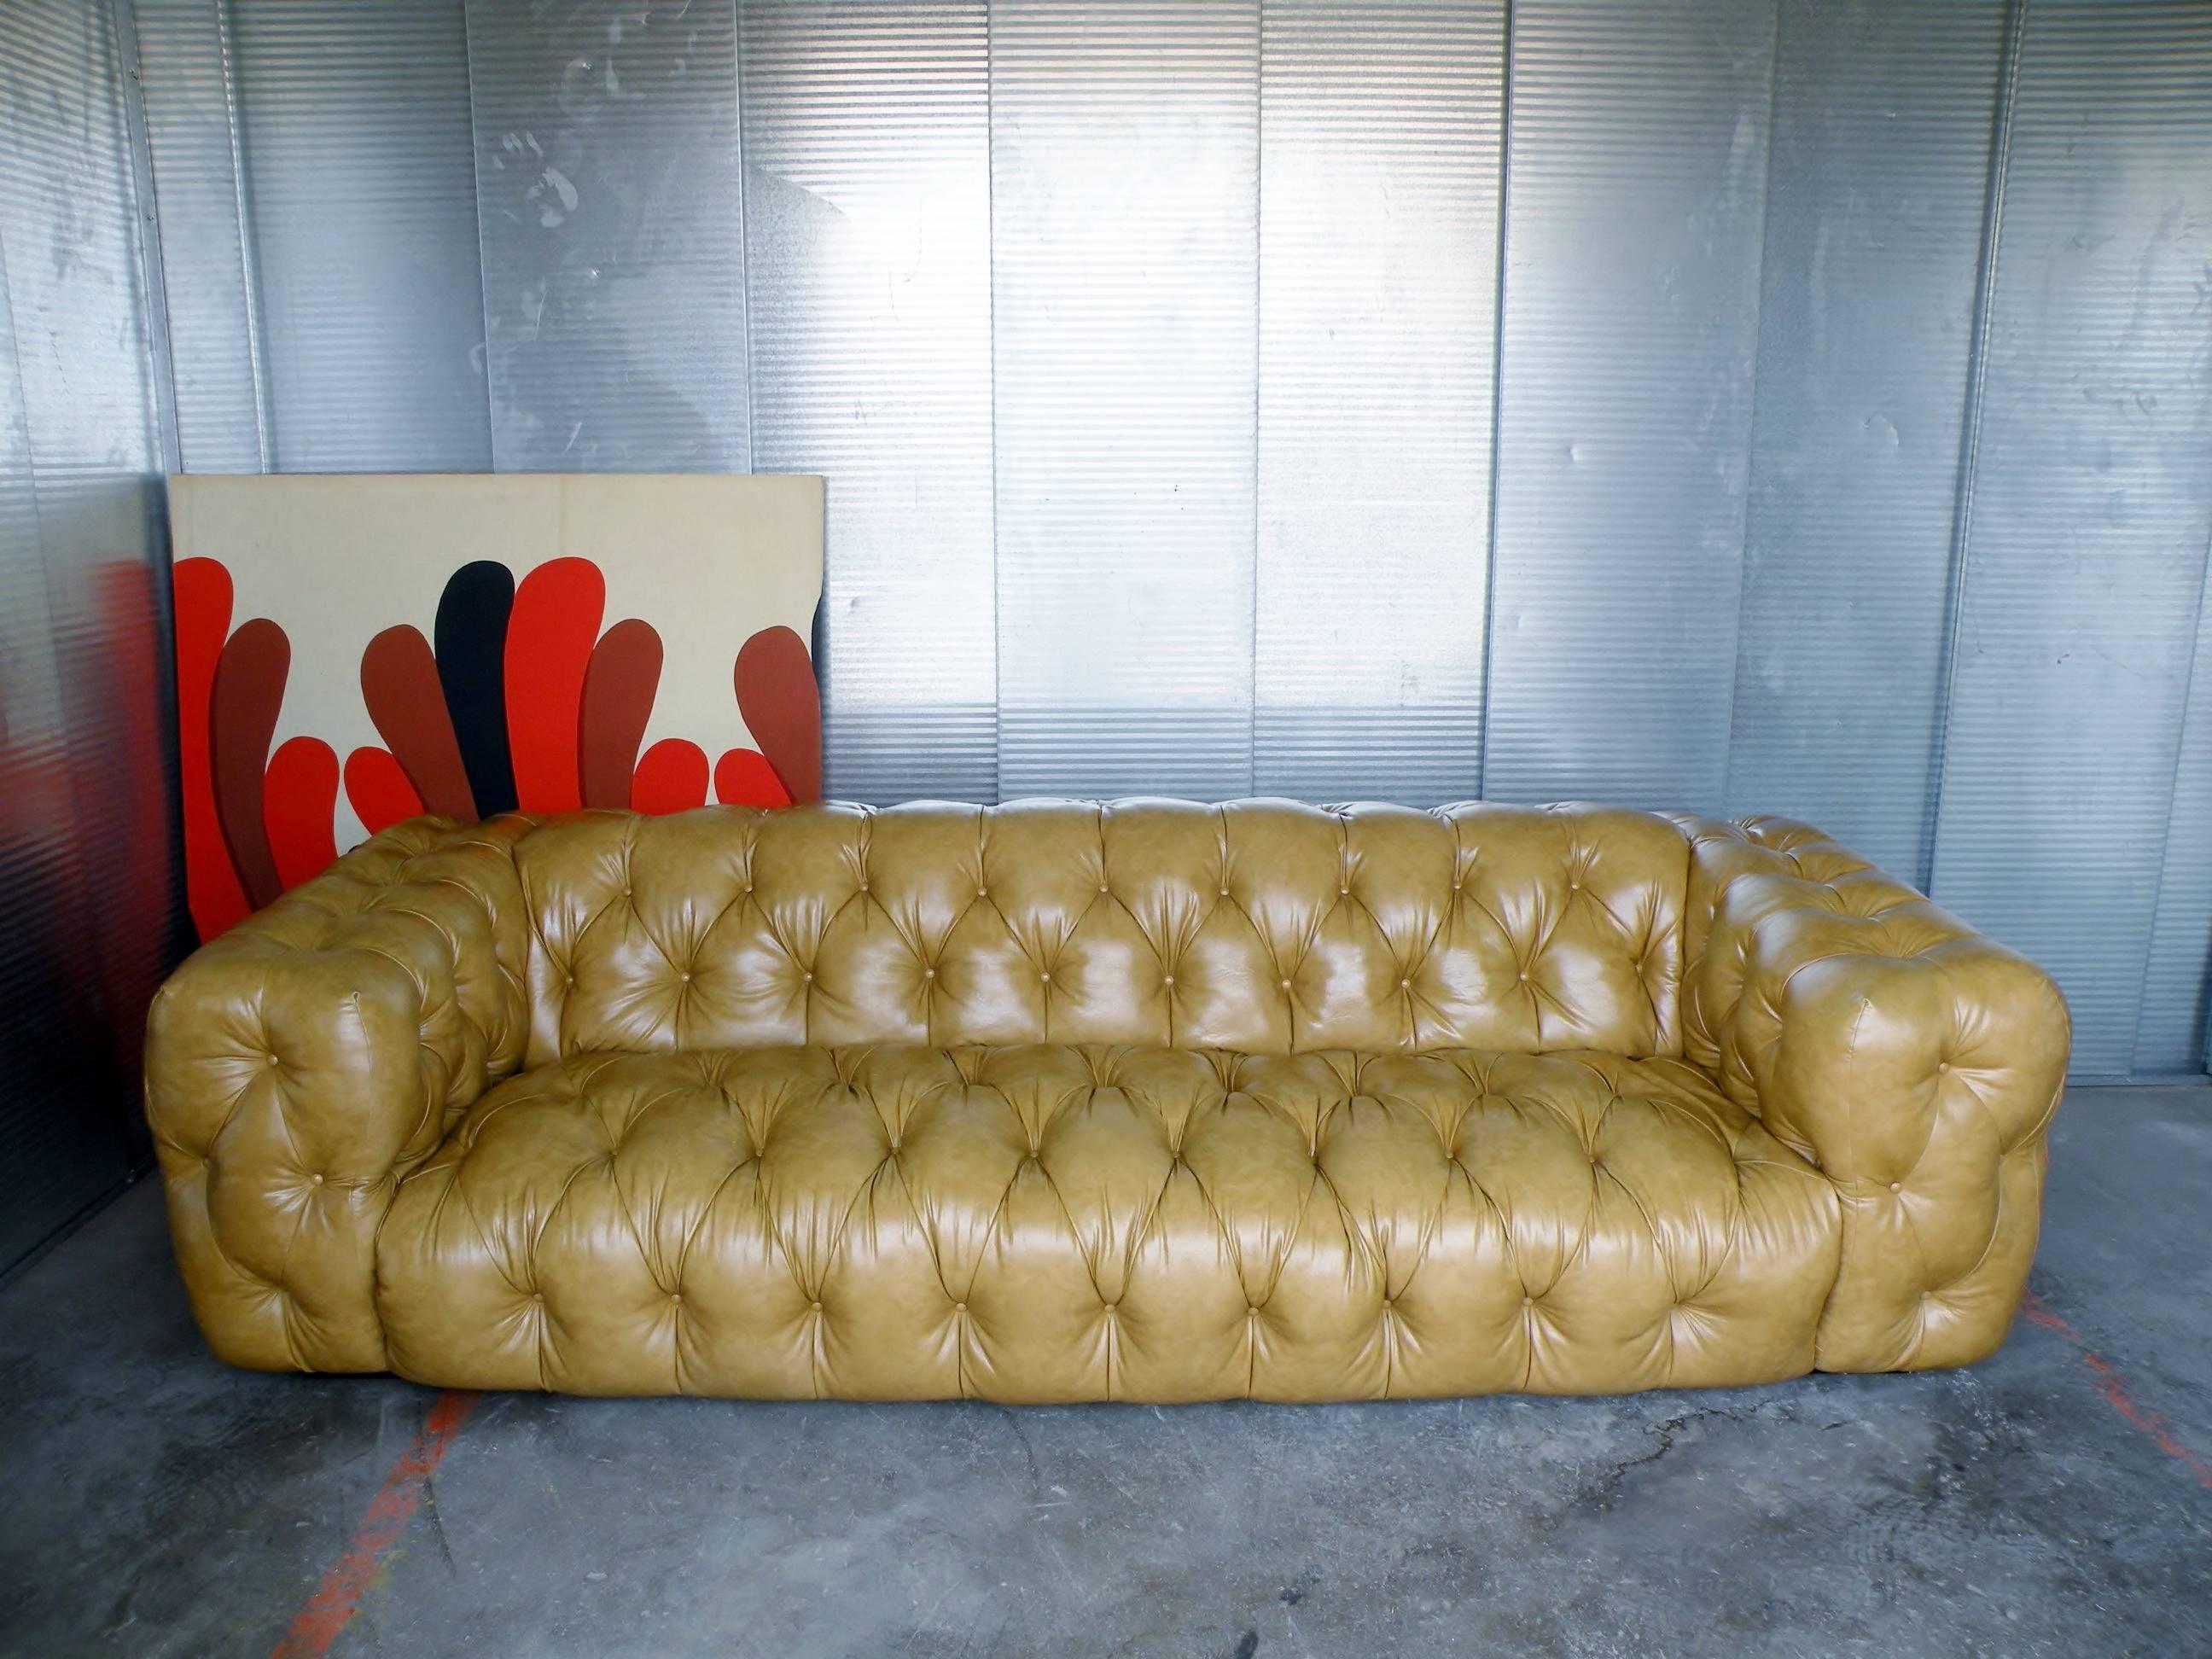 Important and rarely seen 1970s era Milo Baughman for Thayer Coggin tuxedo style button tufted sofa. Modern luxury meets the Classic Chesterfield sofa. Floats on low platform base with all sides and surfaces fully tufted in original soft man-made